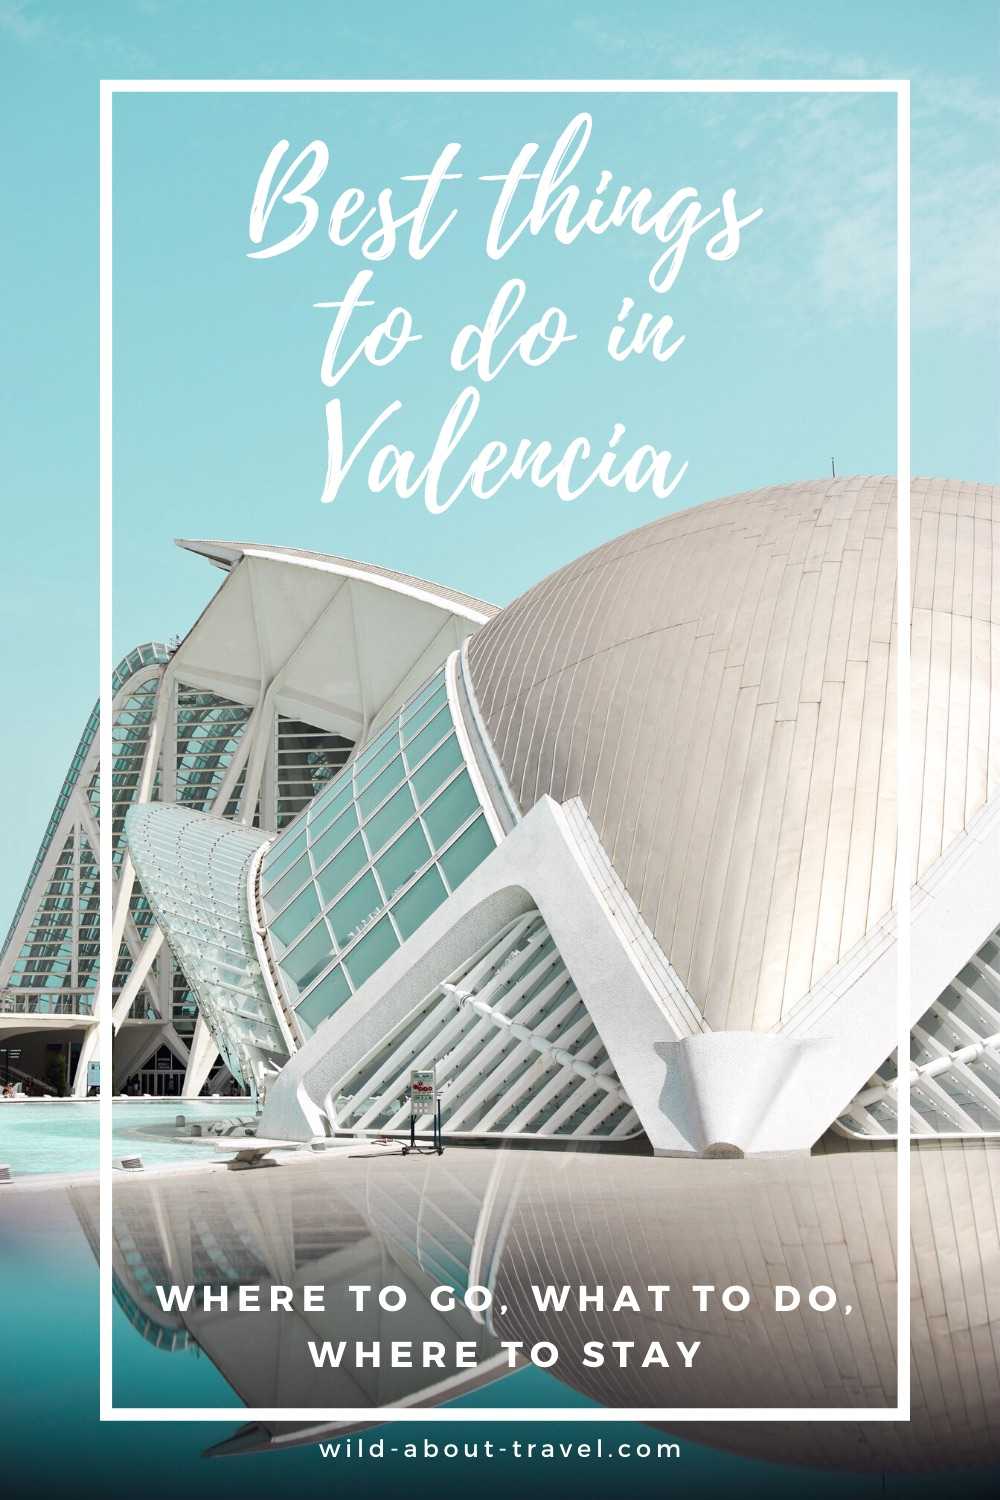 Best things to do in Valencia, Spain